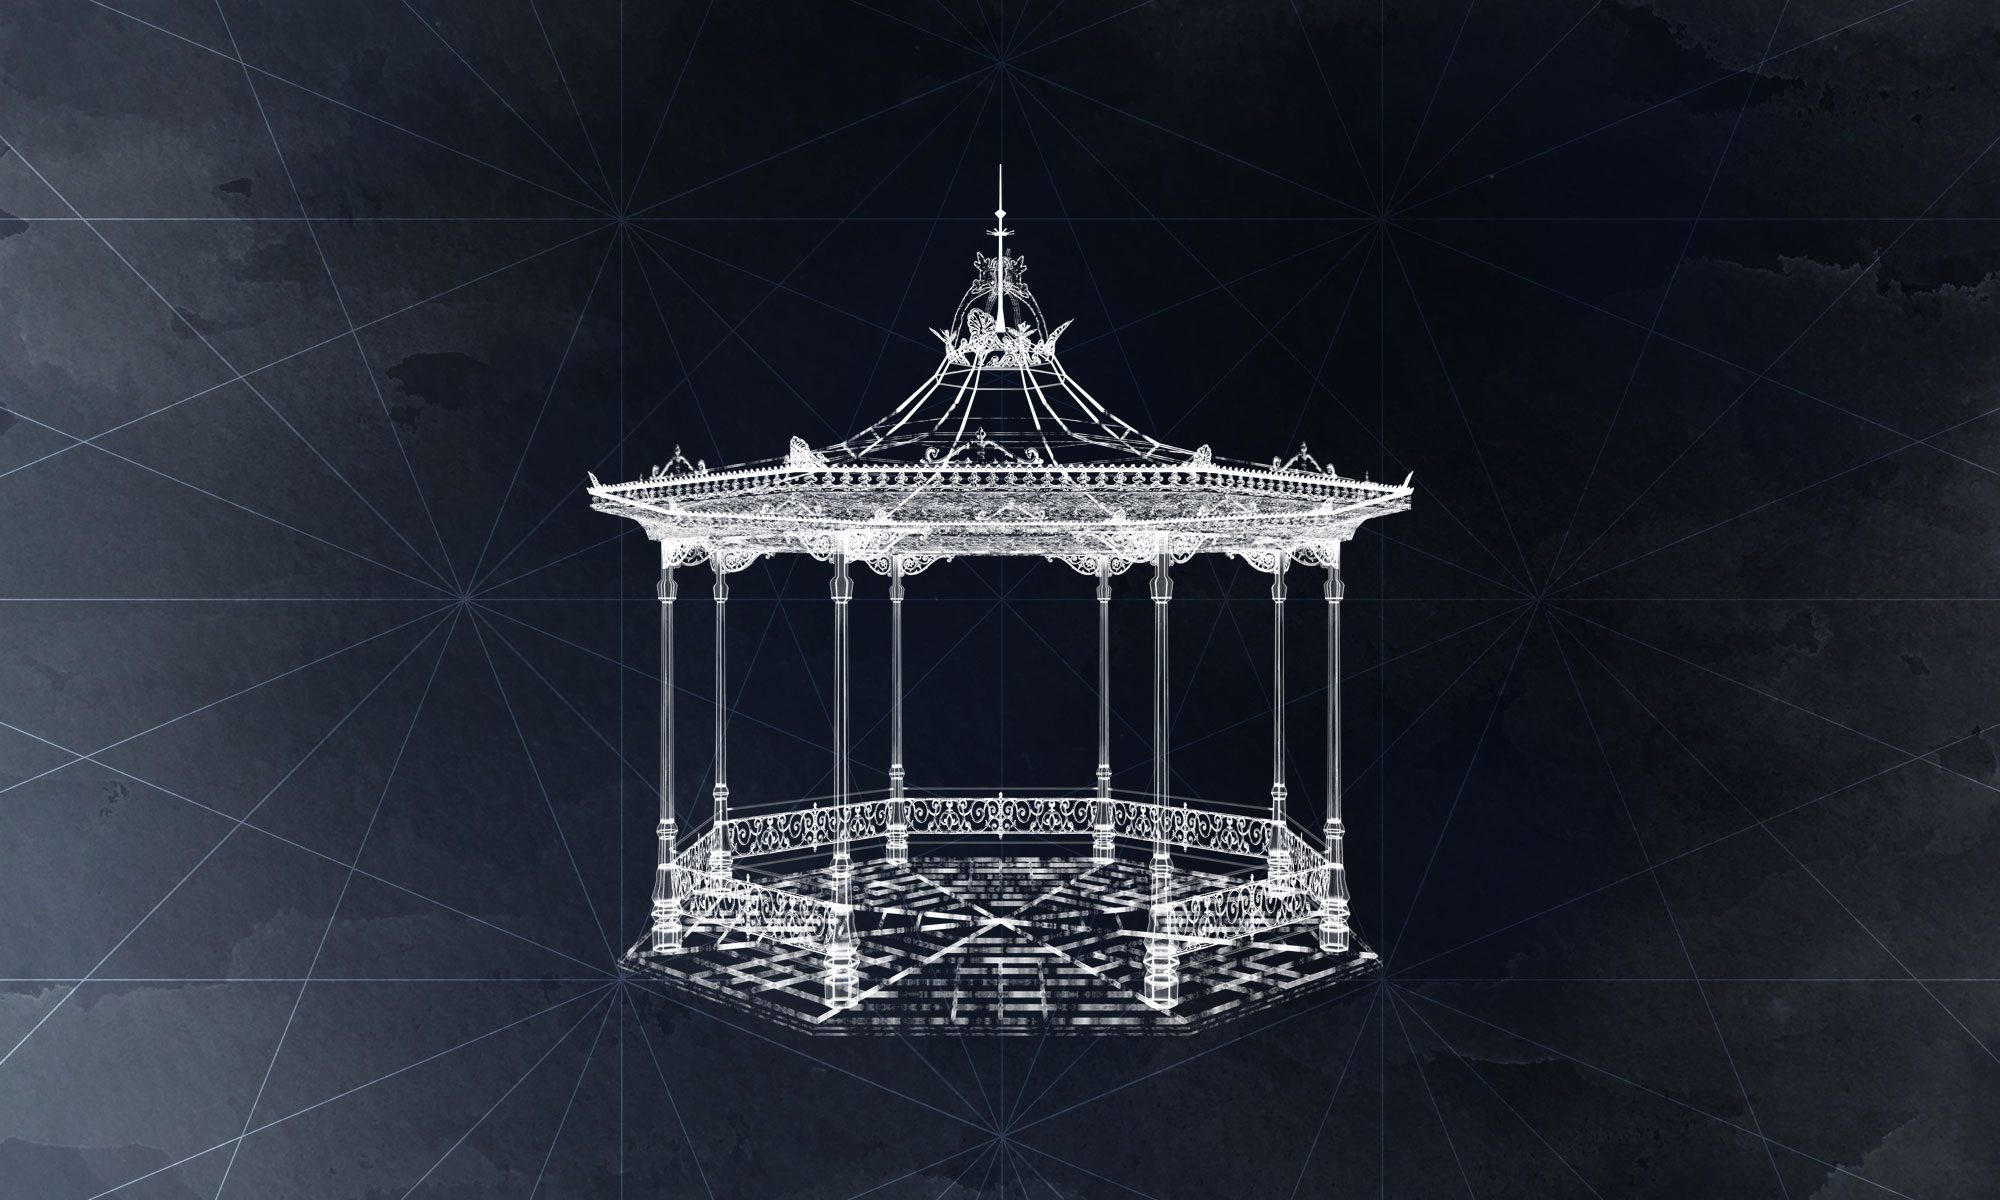 A blueprint style illustration of a bandstand in white against a dark background.